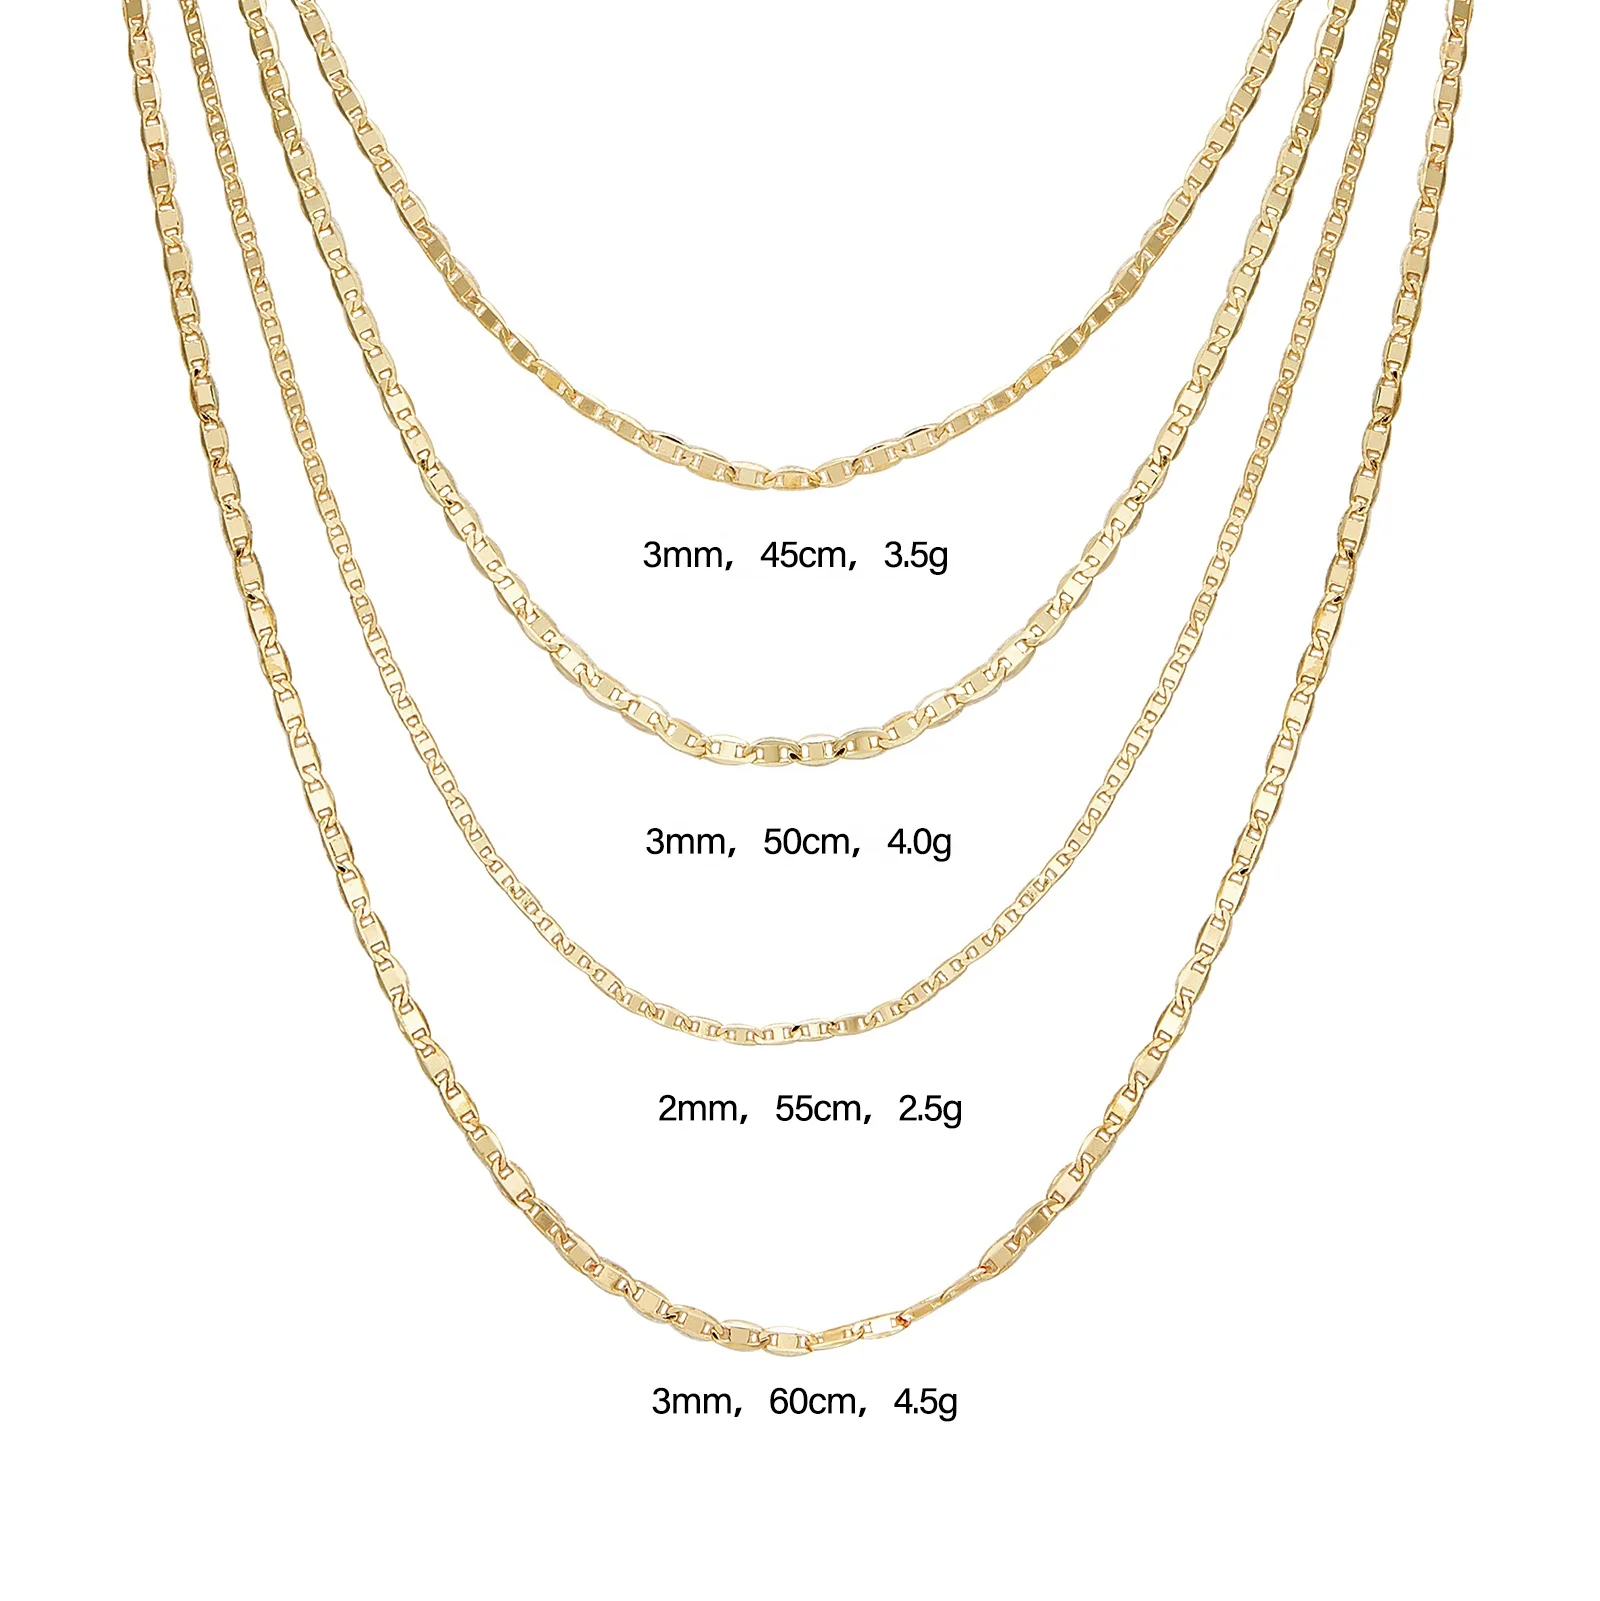 

Elfic Hot Sale Gold Plated Necklace 14k Gold Plated 18inch-24inch cuban Chain